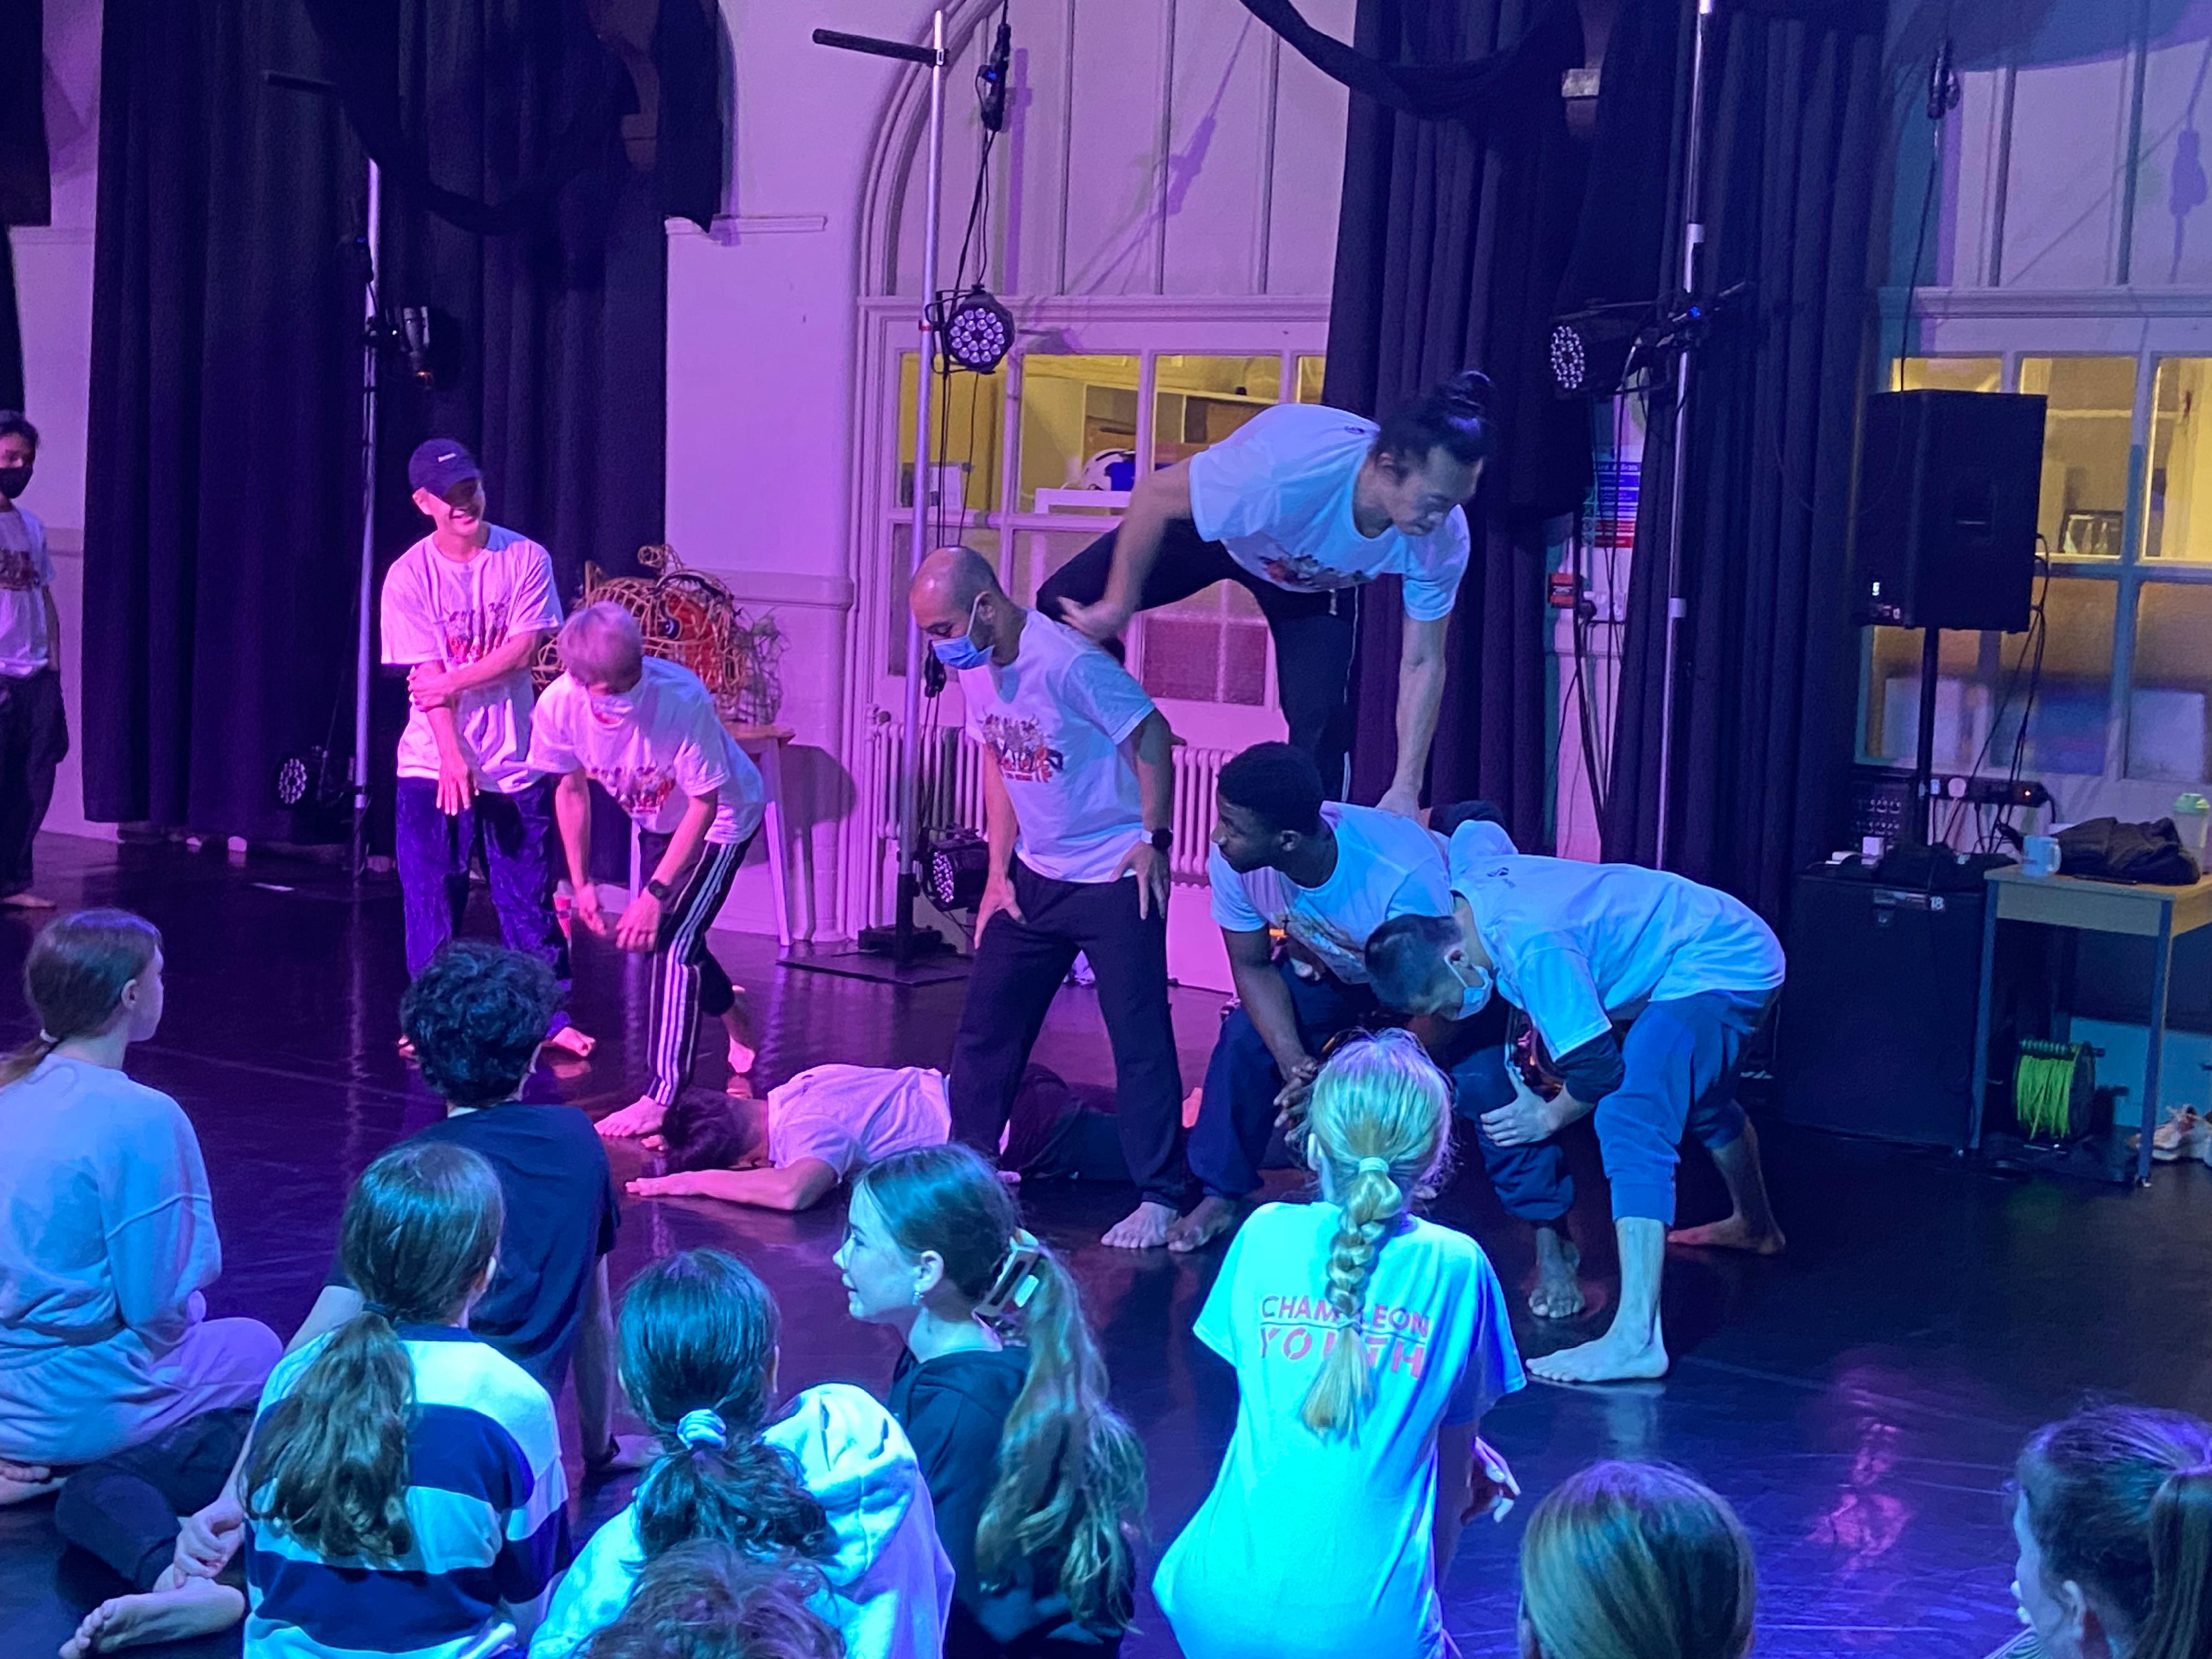 The Hong Kong Economic and Trade Office, London supported Hong Kong performance art group TS Crew’s tour across three cities in the United Kingdom, namely, Bournemouth, Manchester and London. Photo shows TS Crew’s cultural exchange workshop in Manchester.